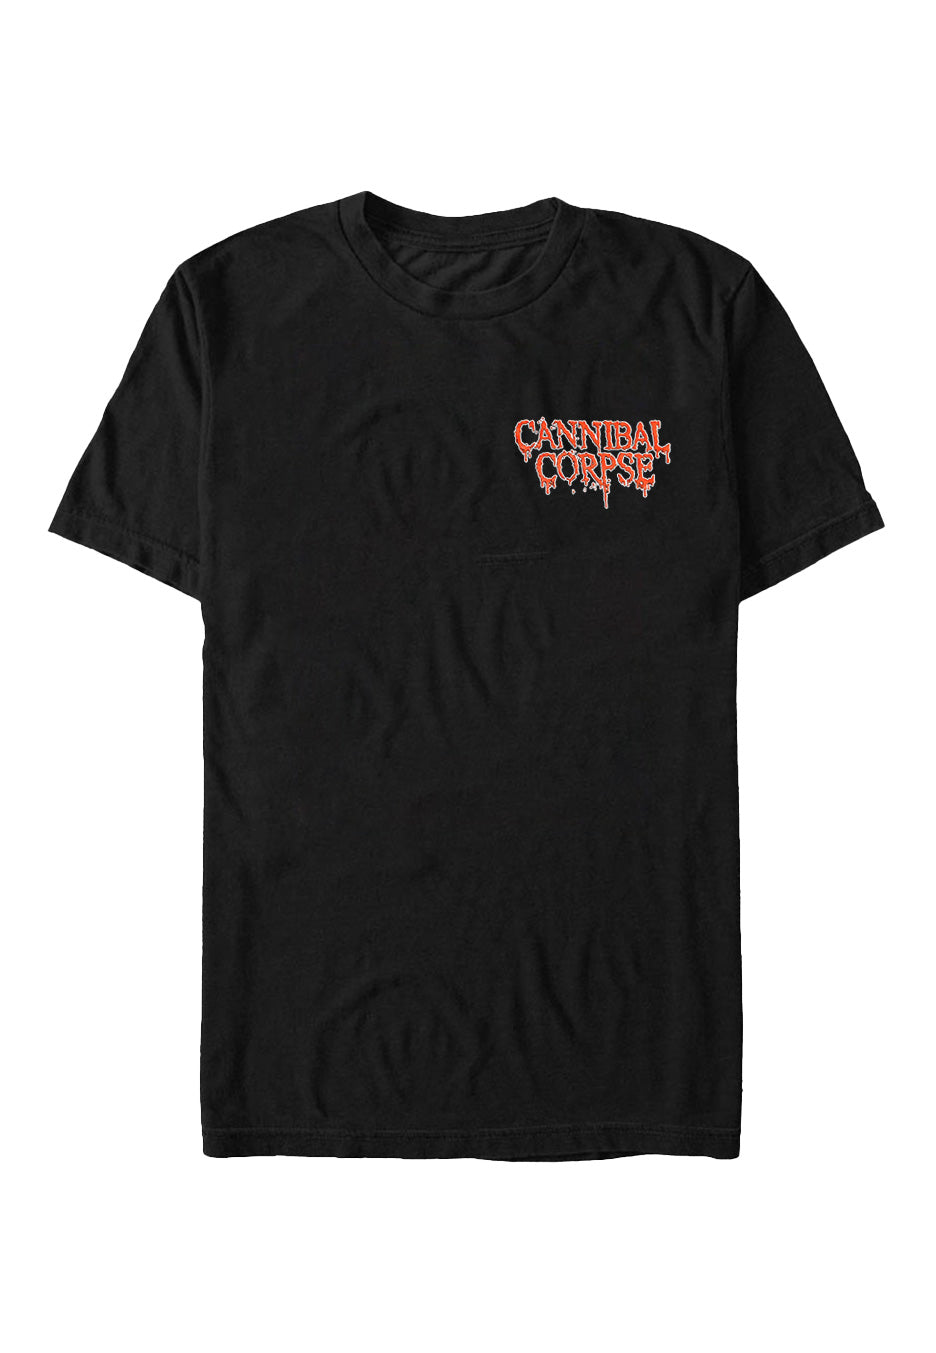 Cannibal Corpse - Zombie Grave - T-Shirt